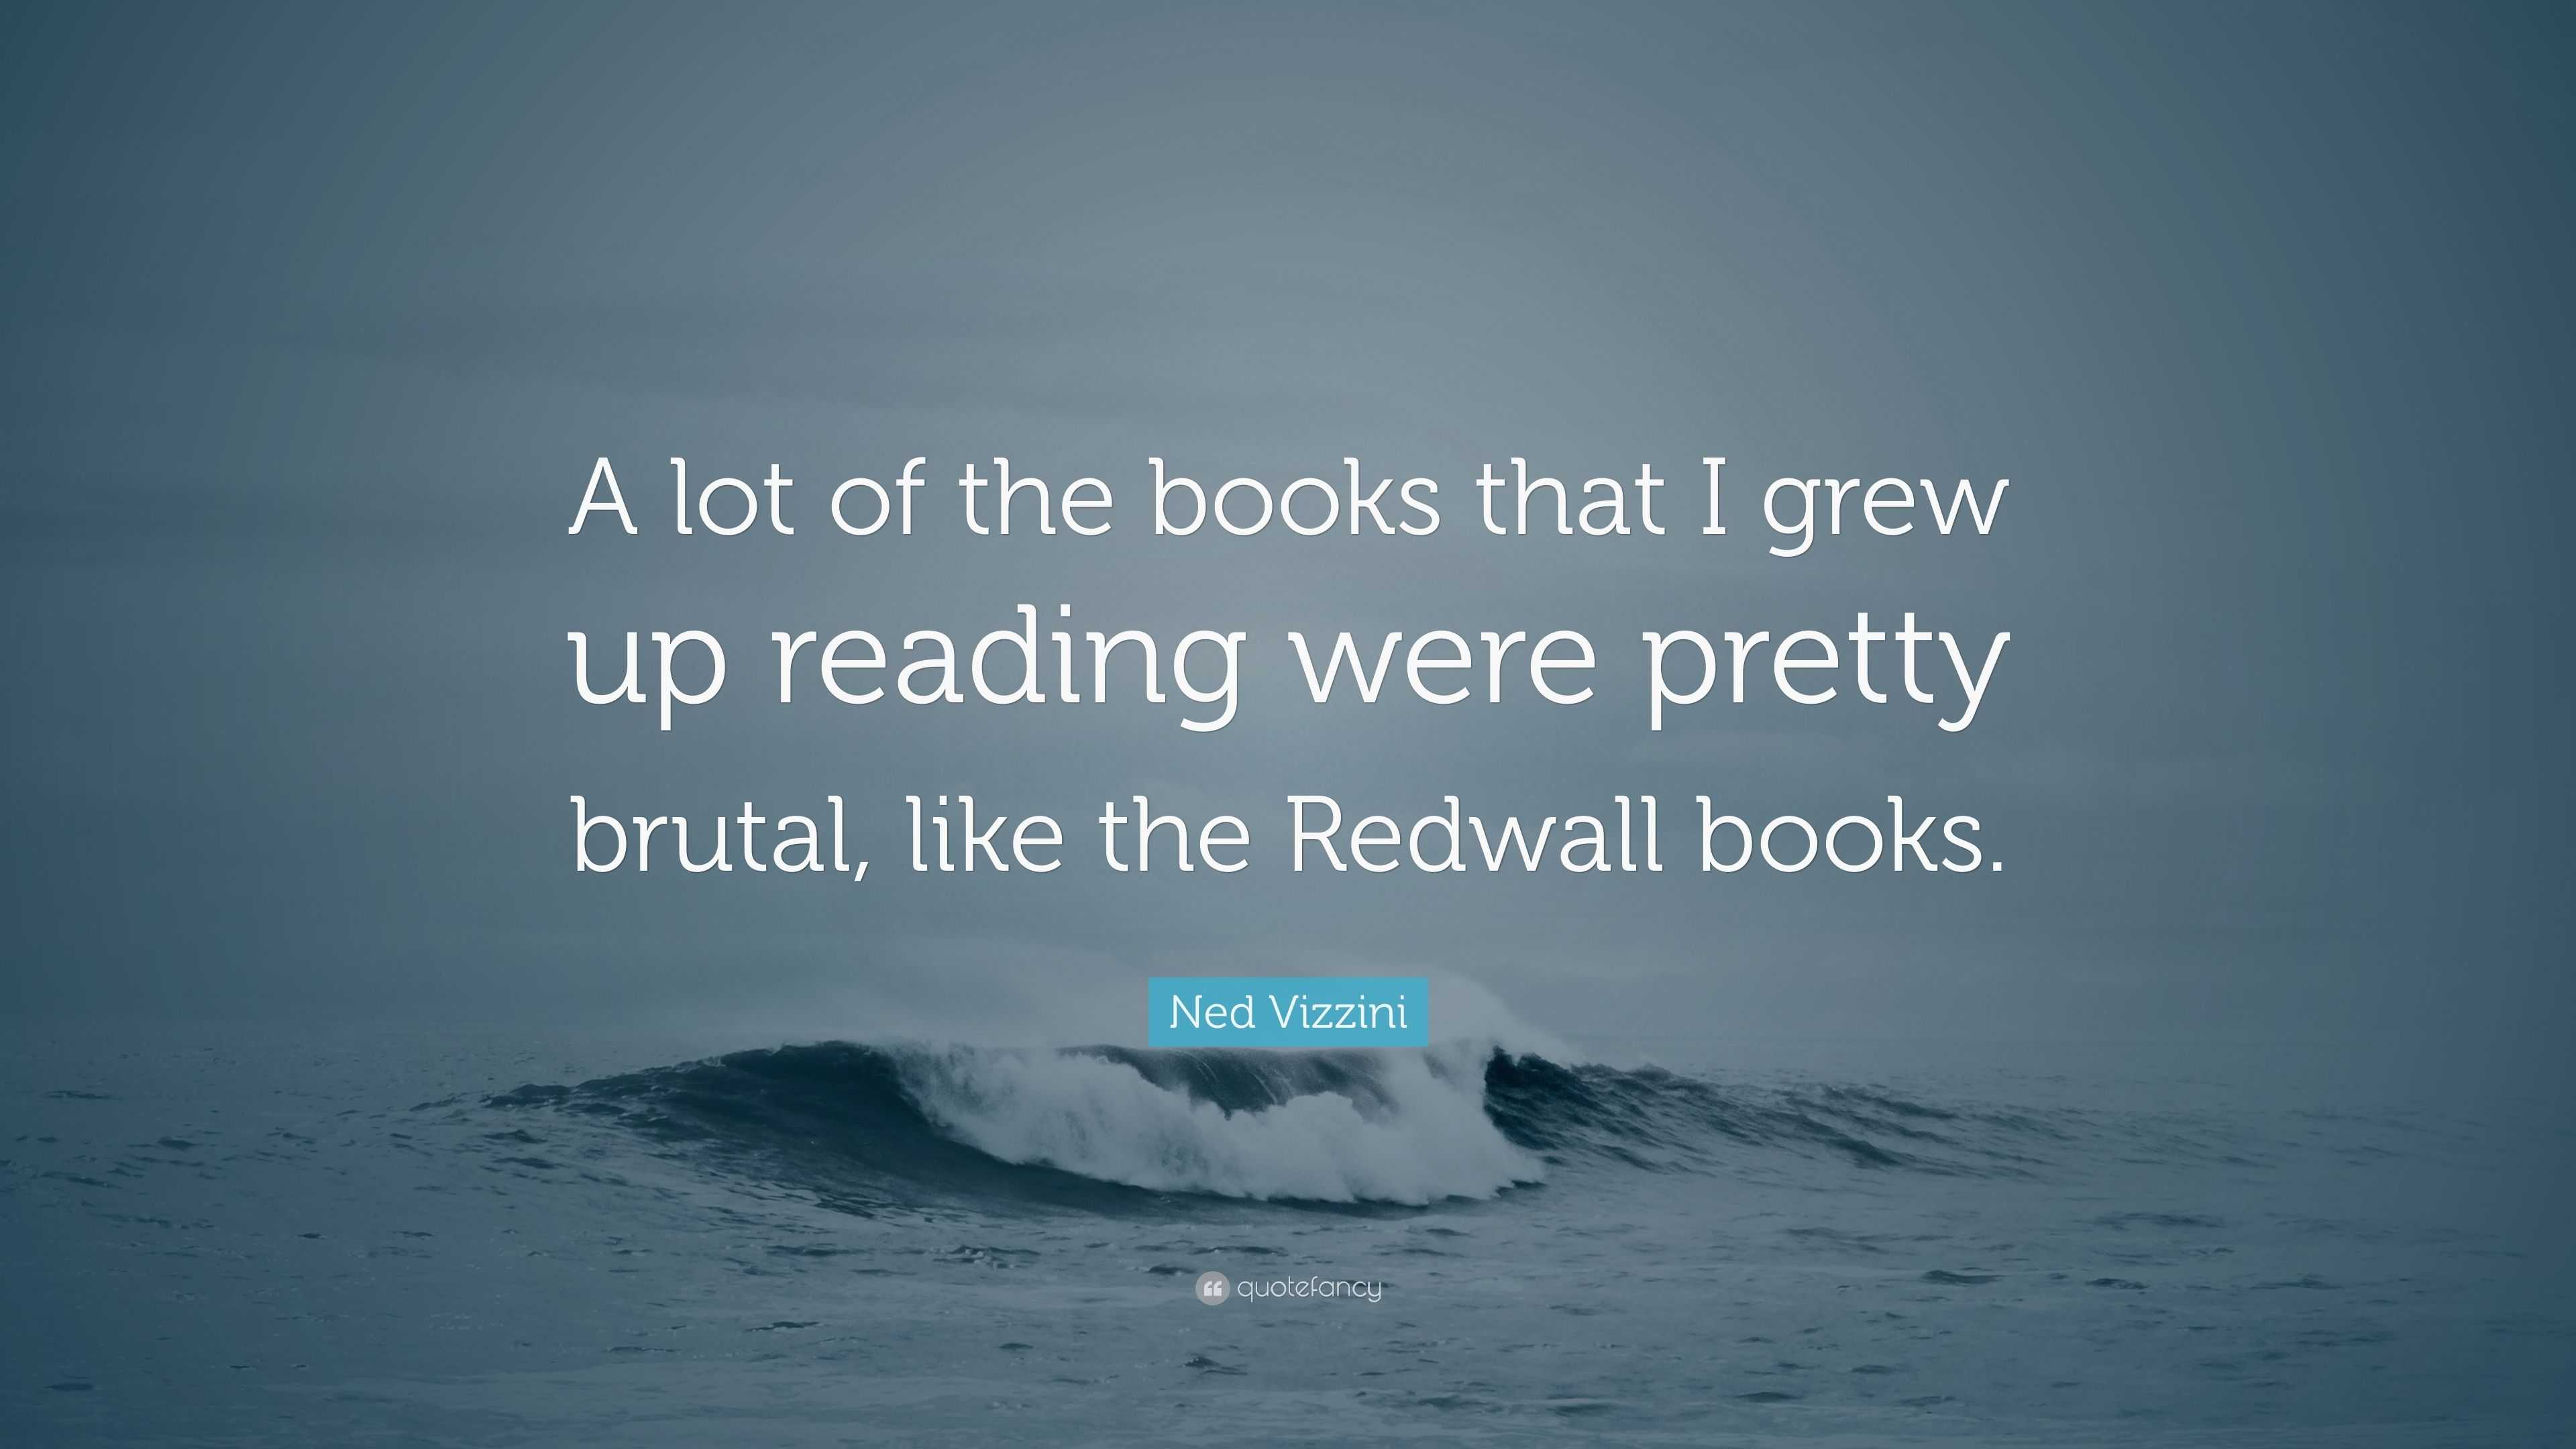 Ned Vizzini Quote: “A lot of the books that I grew up reading were ...